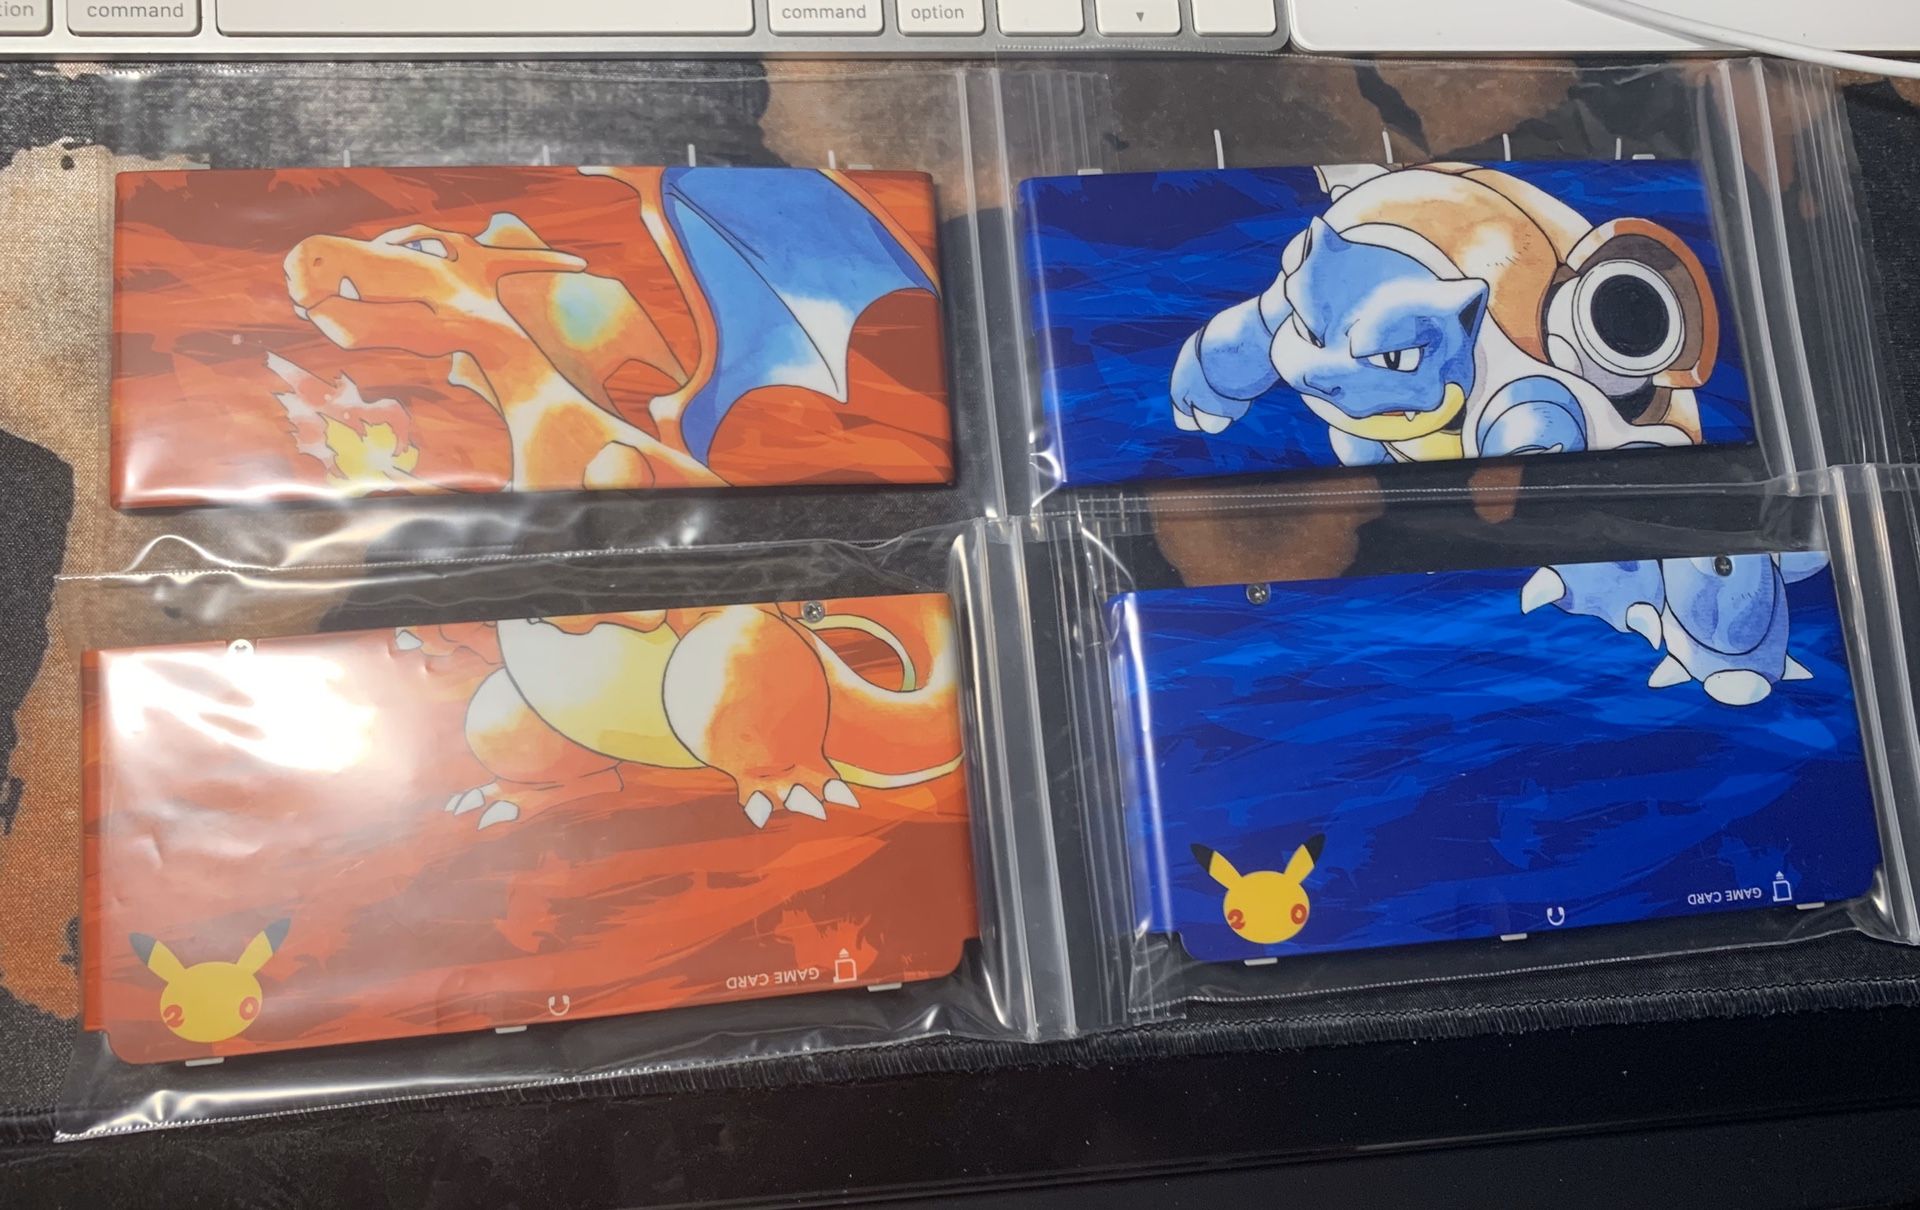 Pokemon 20th anniversary edition face plates for new nintendo 3ds